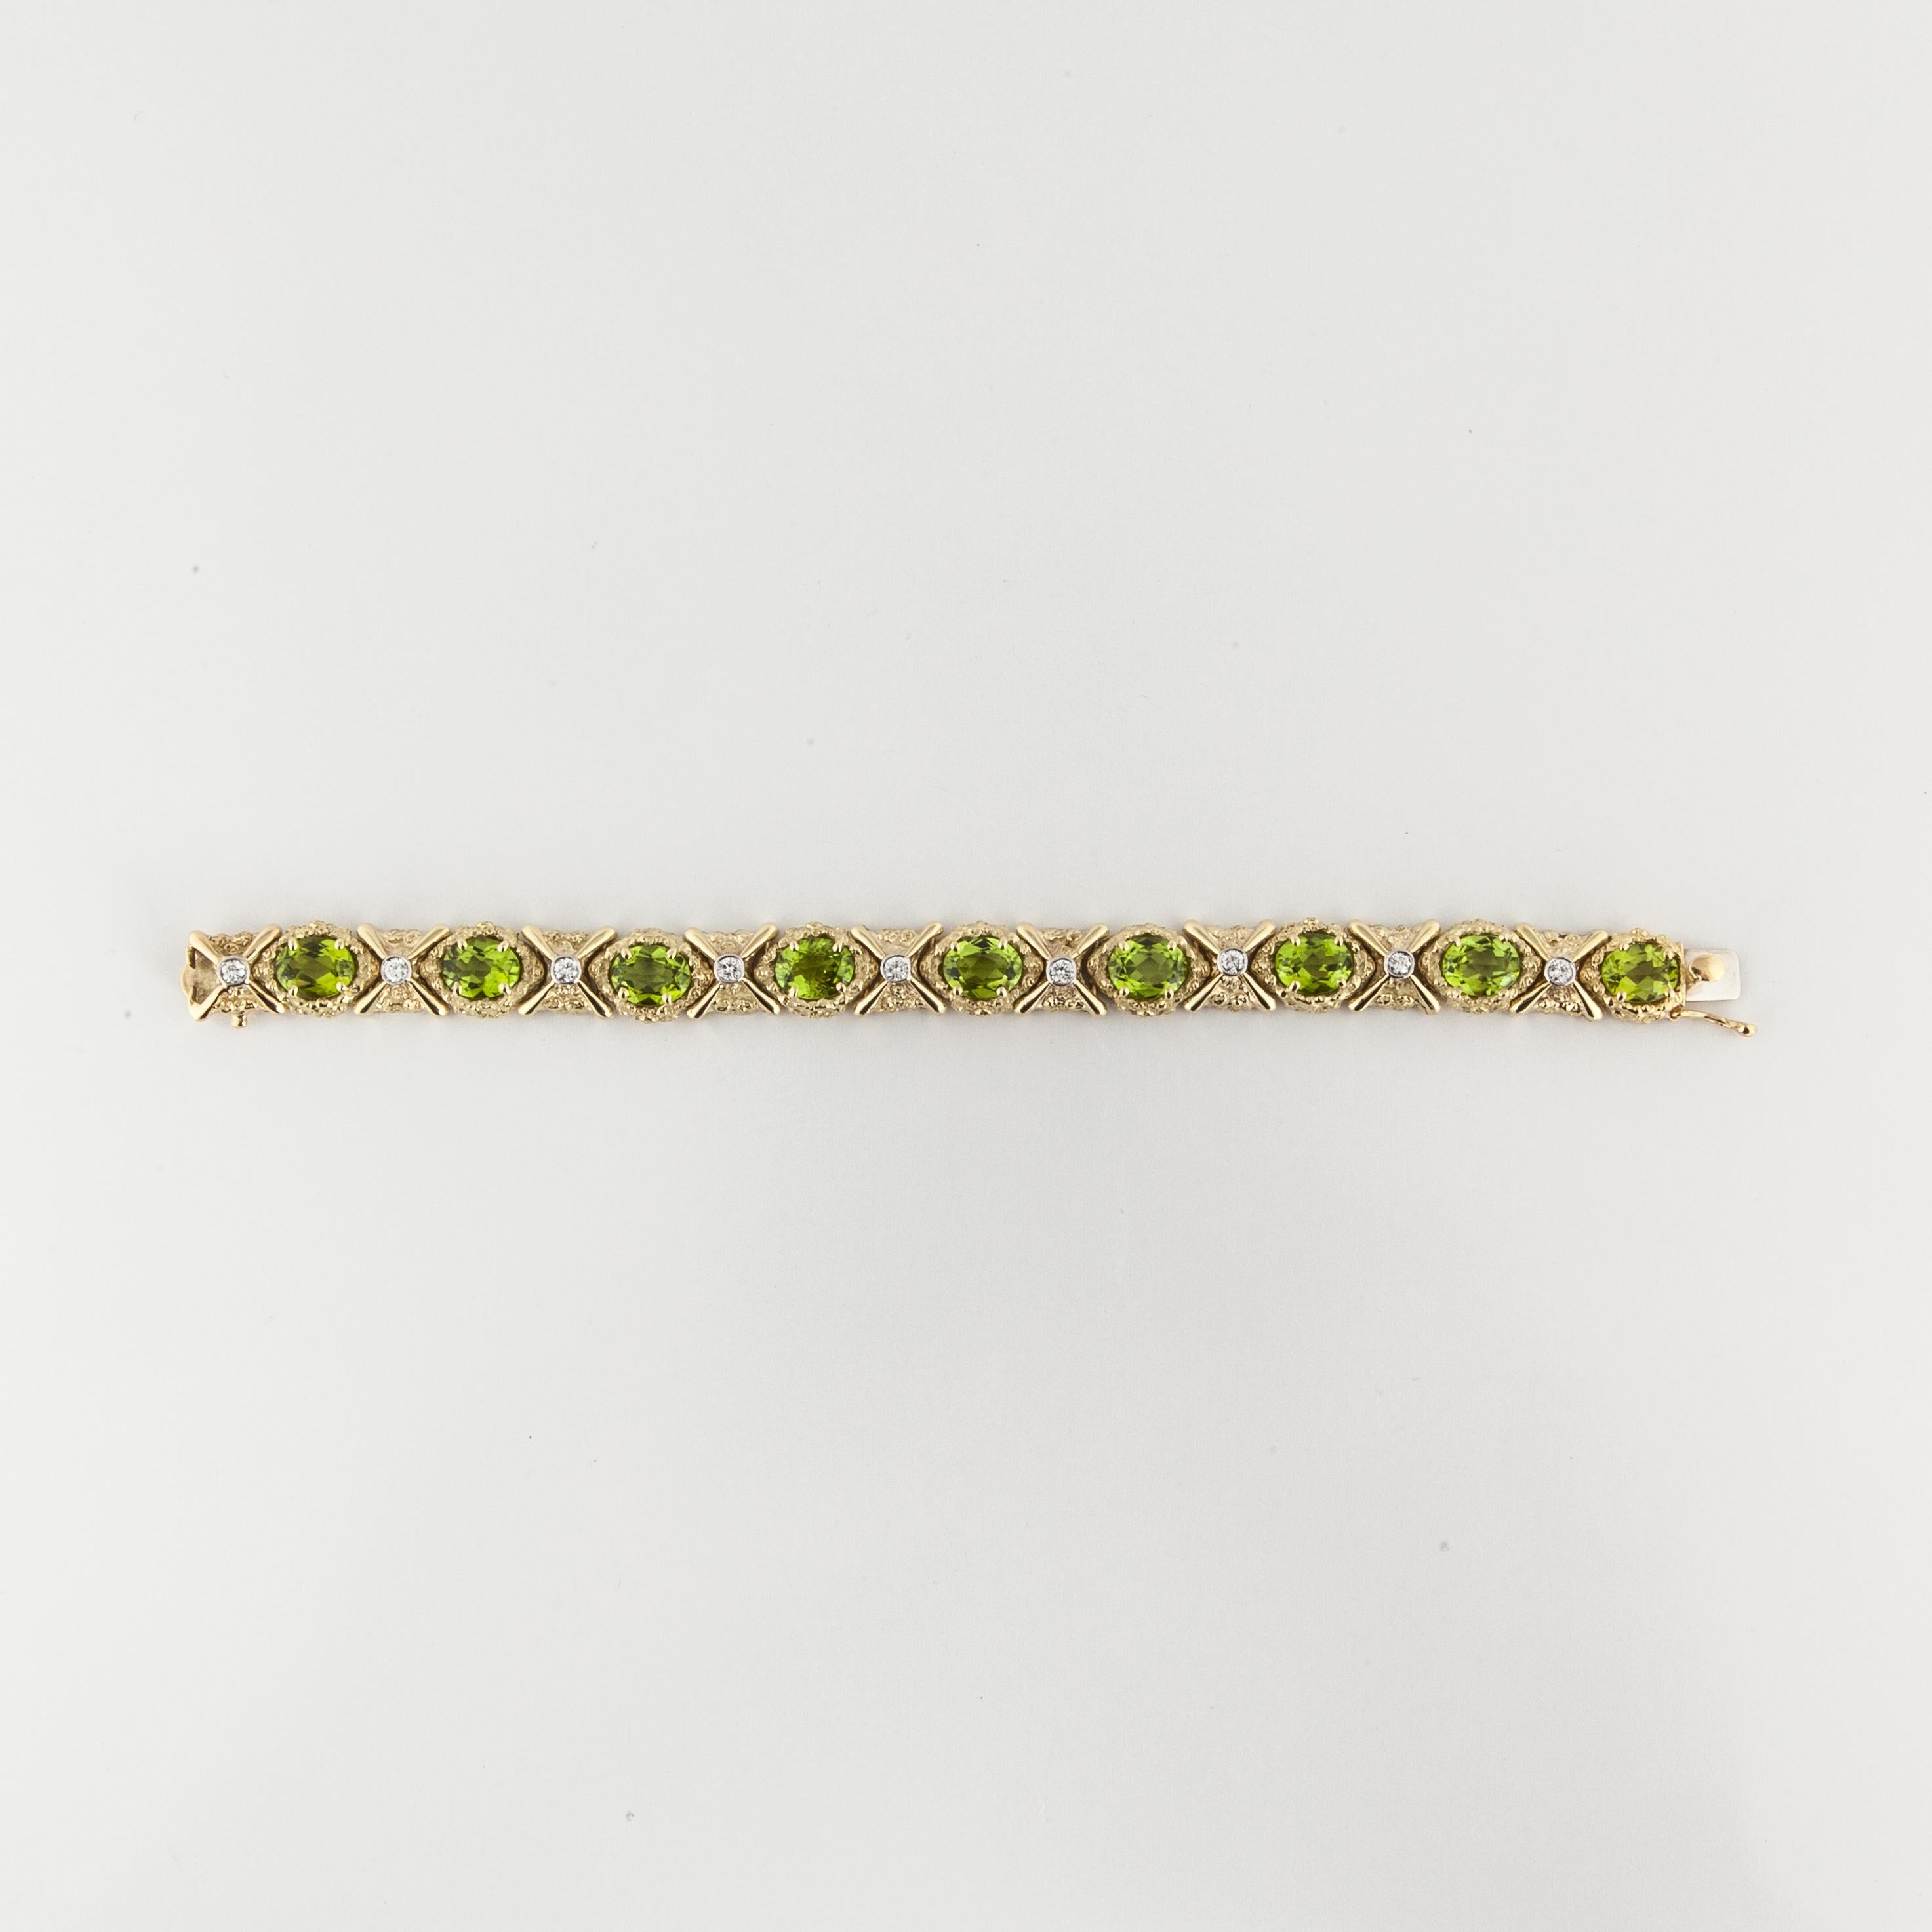 Bracelet in 18K yellow gold with peridots and diamonds.  There are nine (9) oval peridots totaling 18 carats.  In addition, there are nine (9) round diamonds that total 1.25 carats; G-H color and VS clarity.  The bracelet measures 7 inches long and